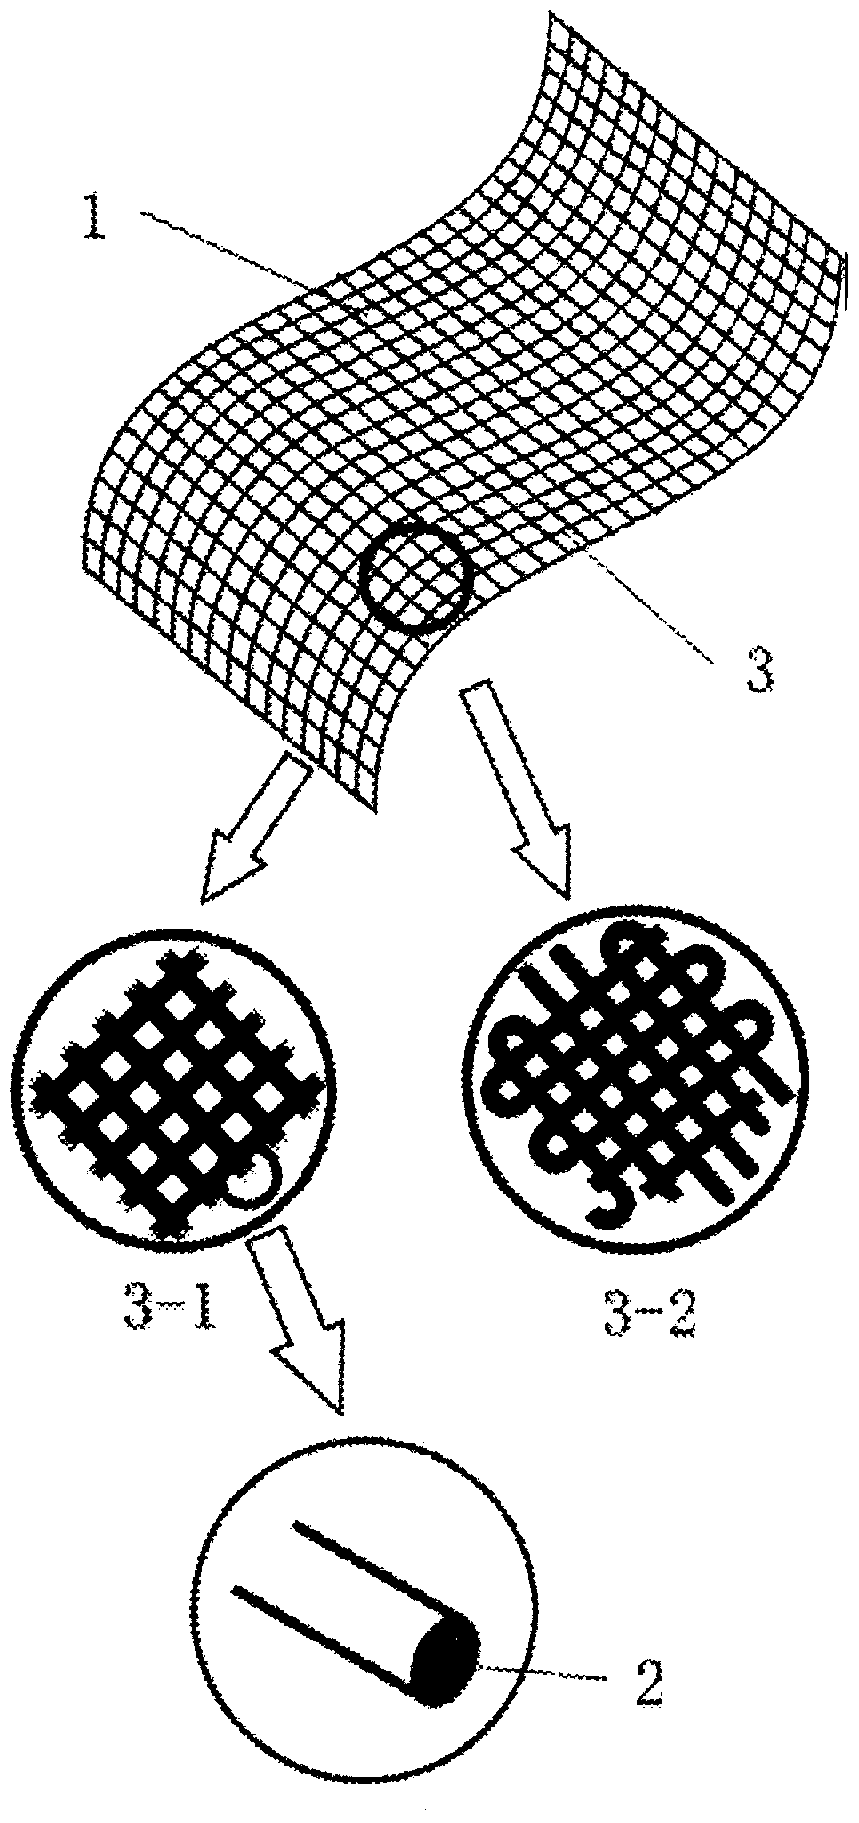 A bandage for fixation based on liquid metal flexible composite material